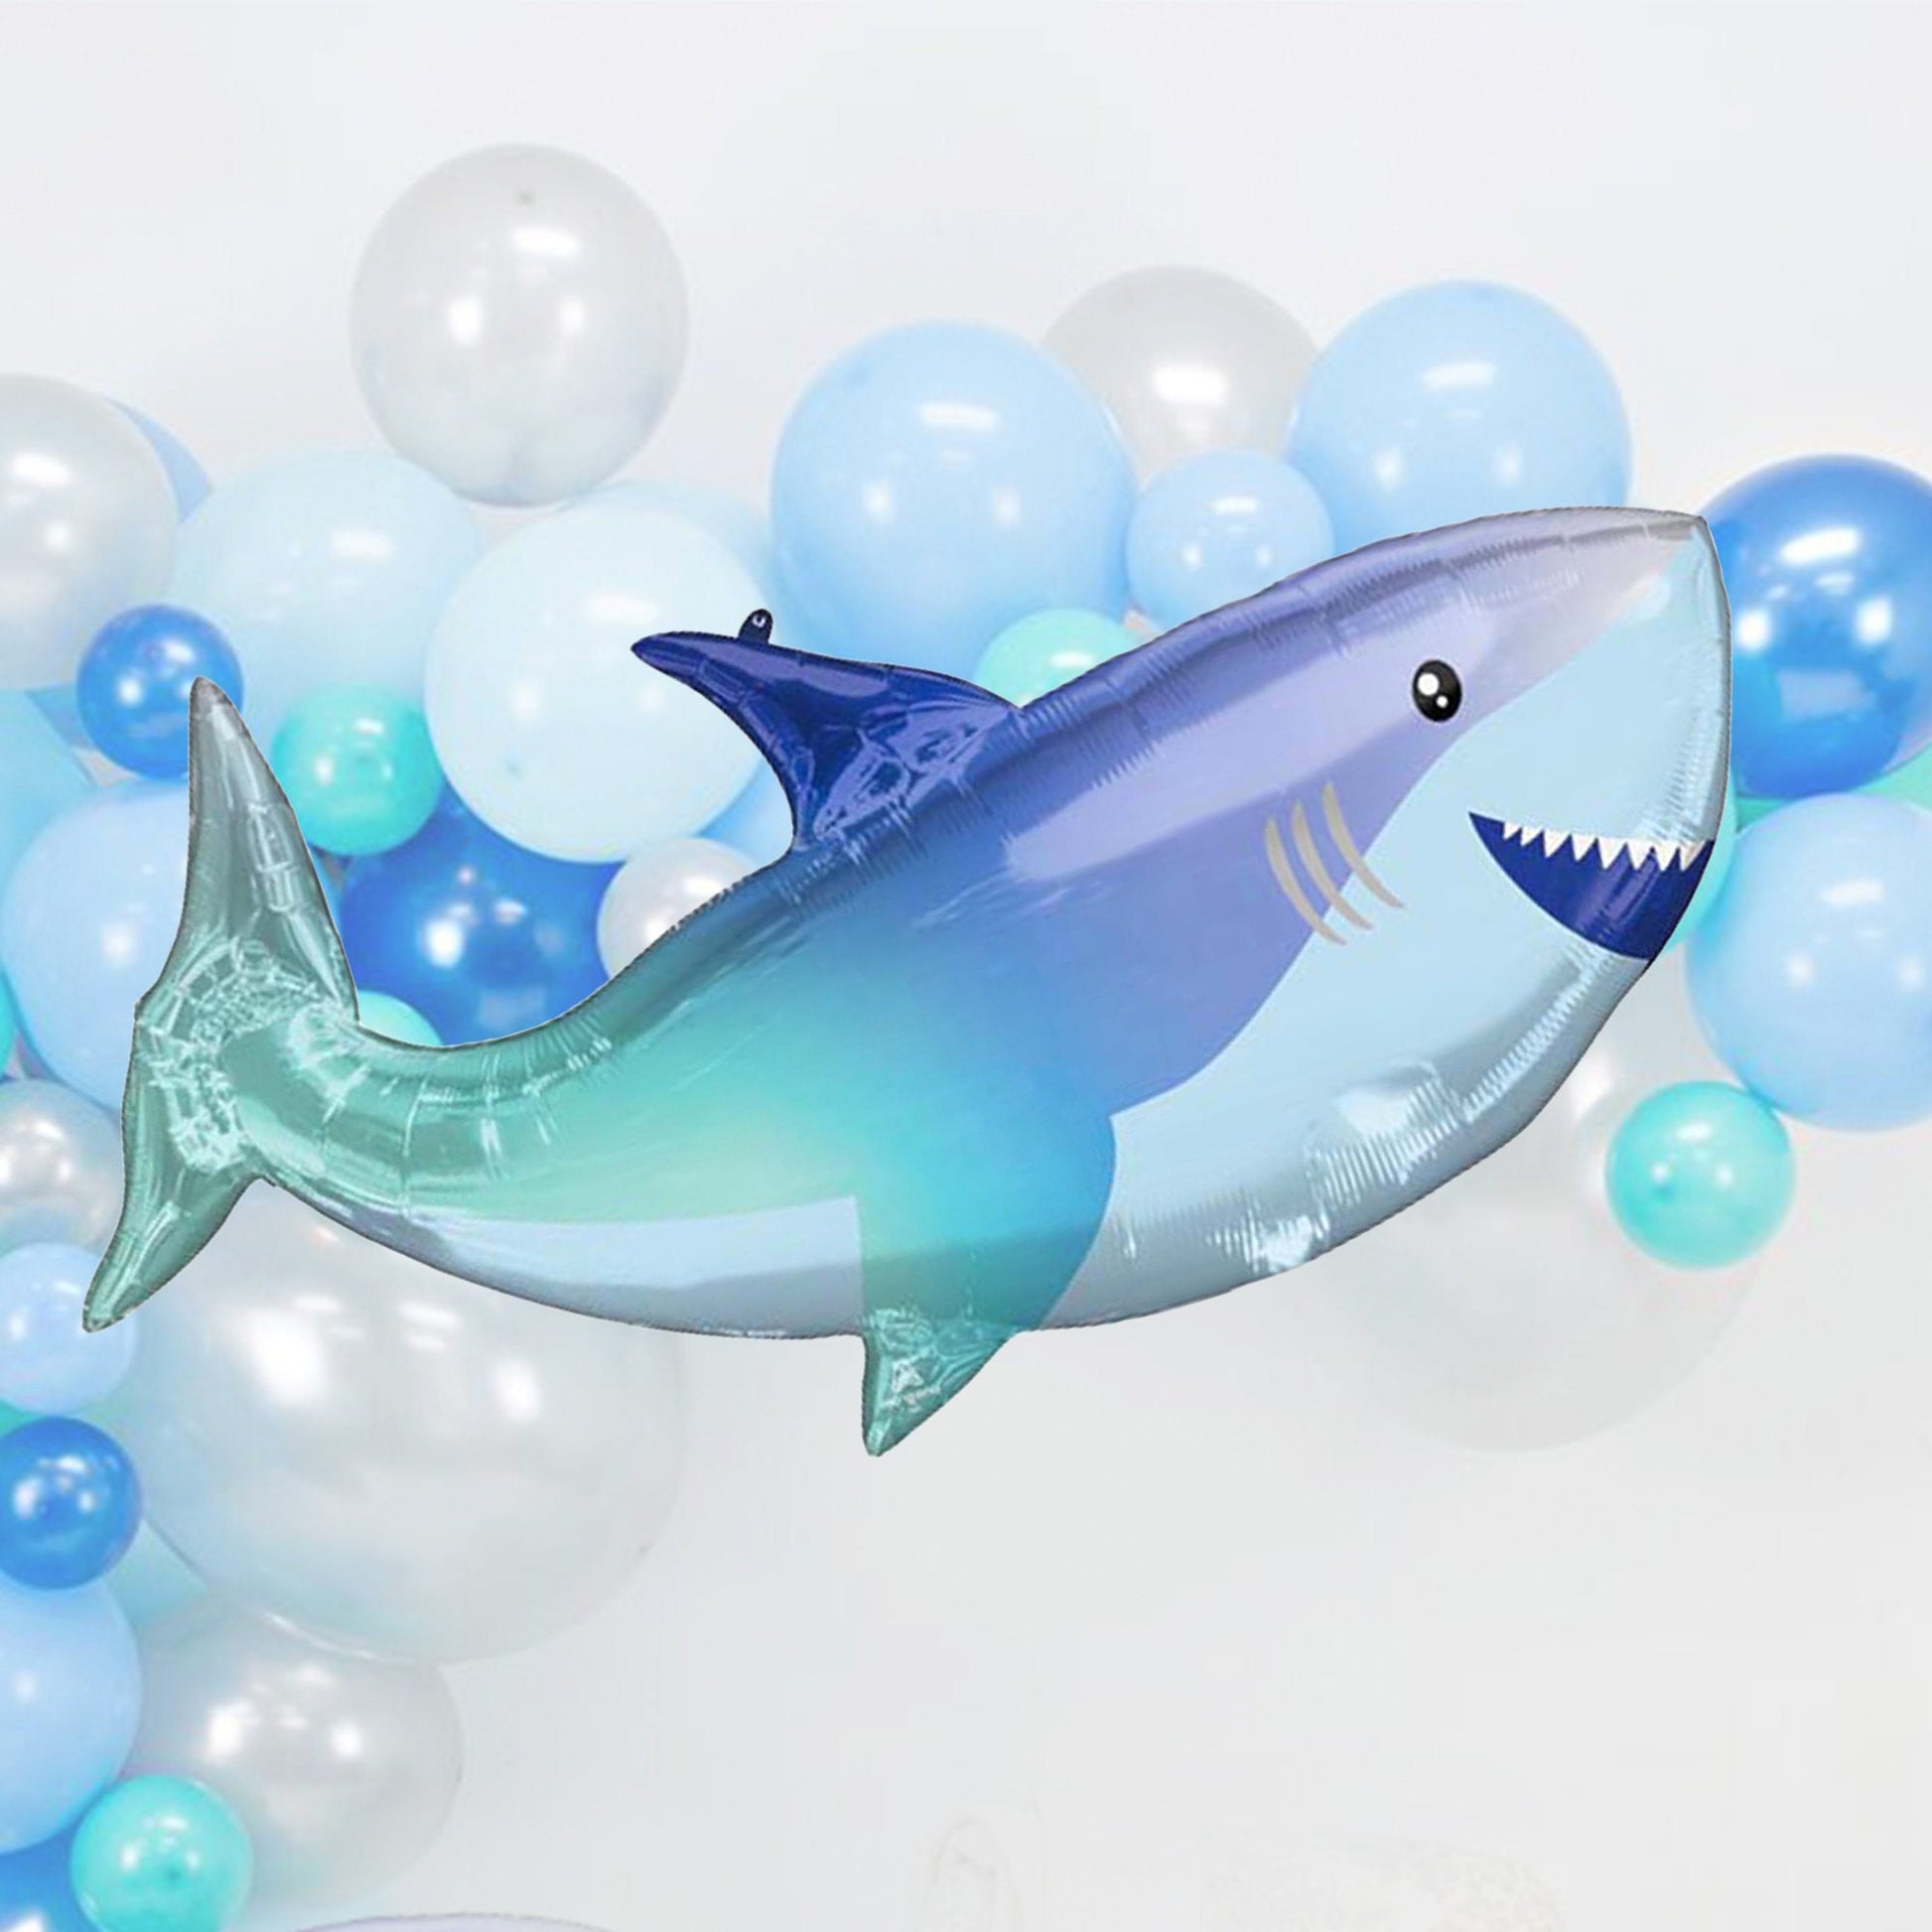 Giant Blue Shark Mylar Balloon (38 Inches) from Ellie's Party Supply